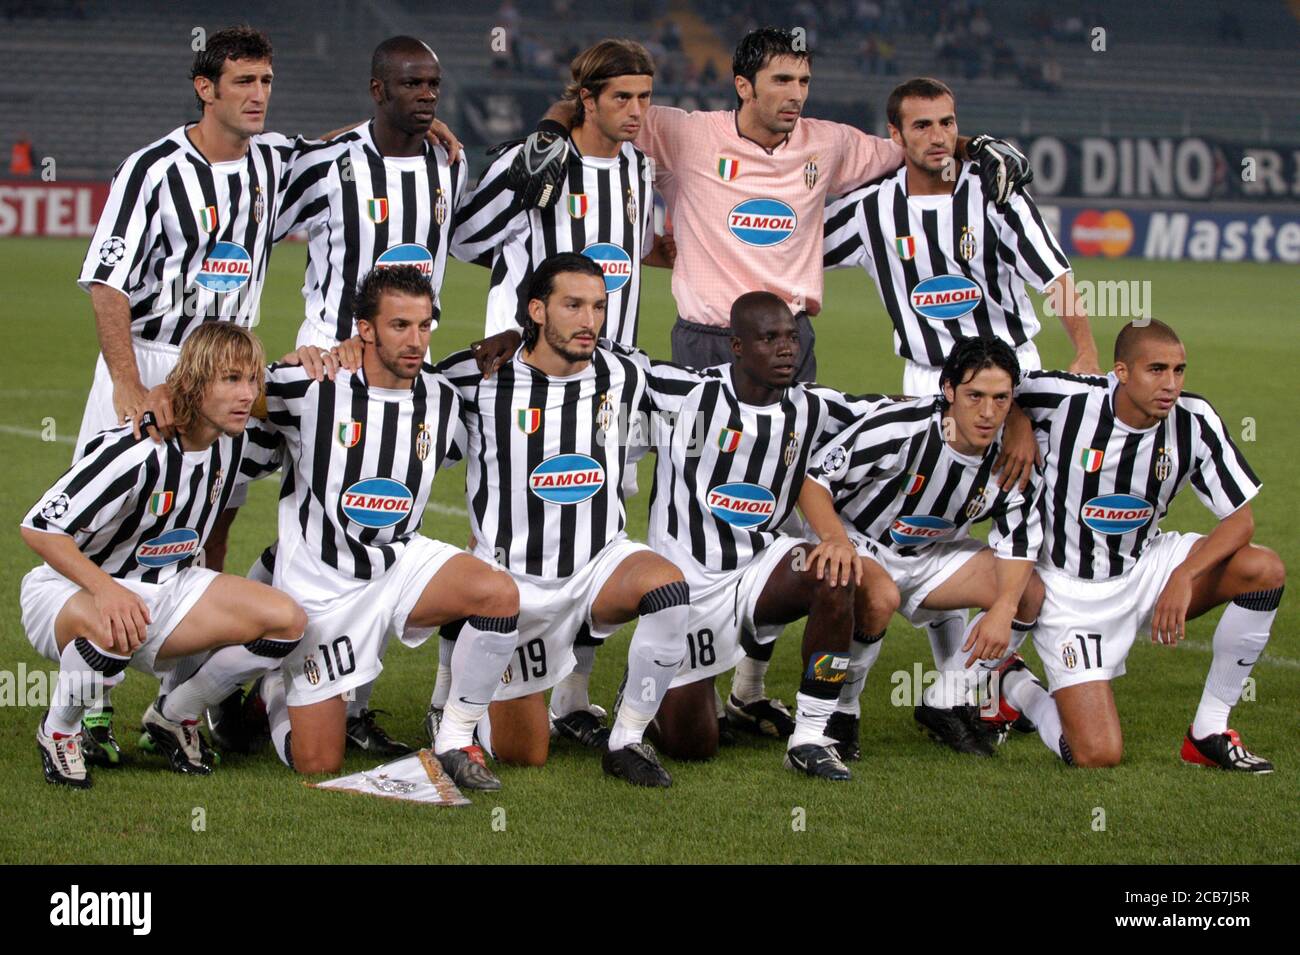 Turin Italy ,17 September 2003, "Delle Alpi" Stadium, UEFA Champions League  2003/2004, FC Juventus- SK Galatasaray: Juventus players before the match  Stock Photo - Alamy